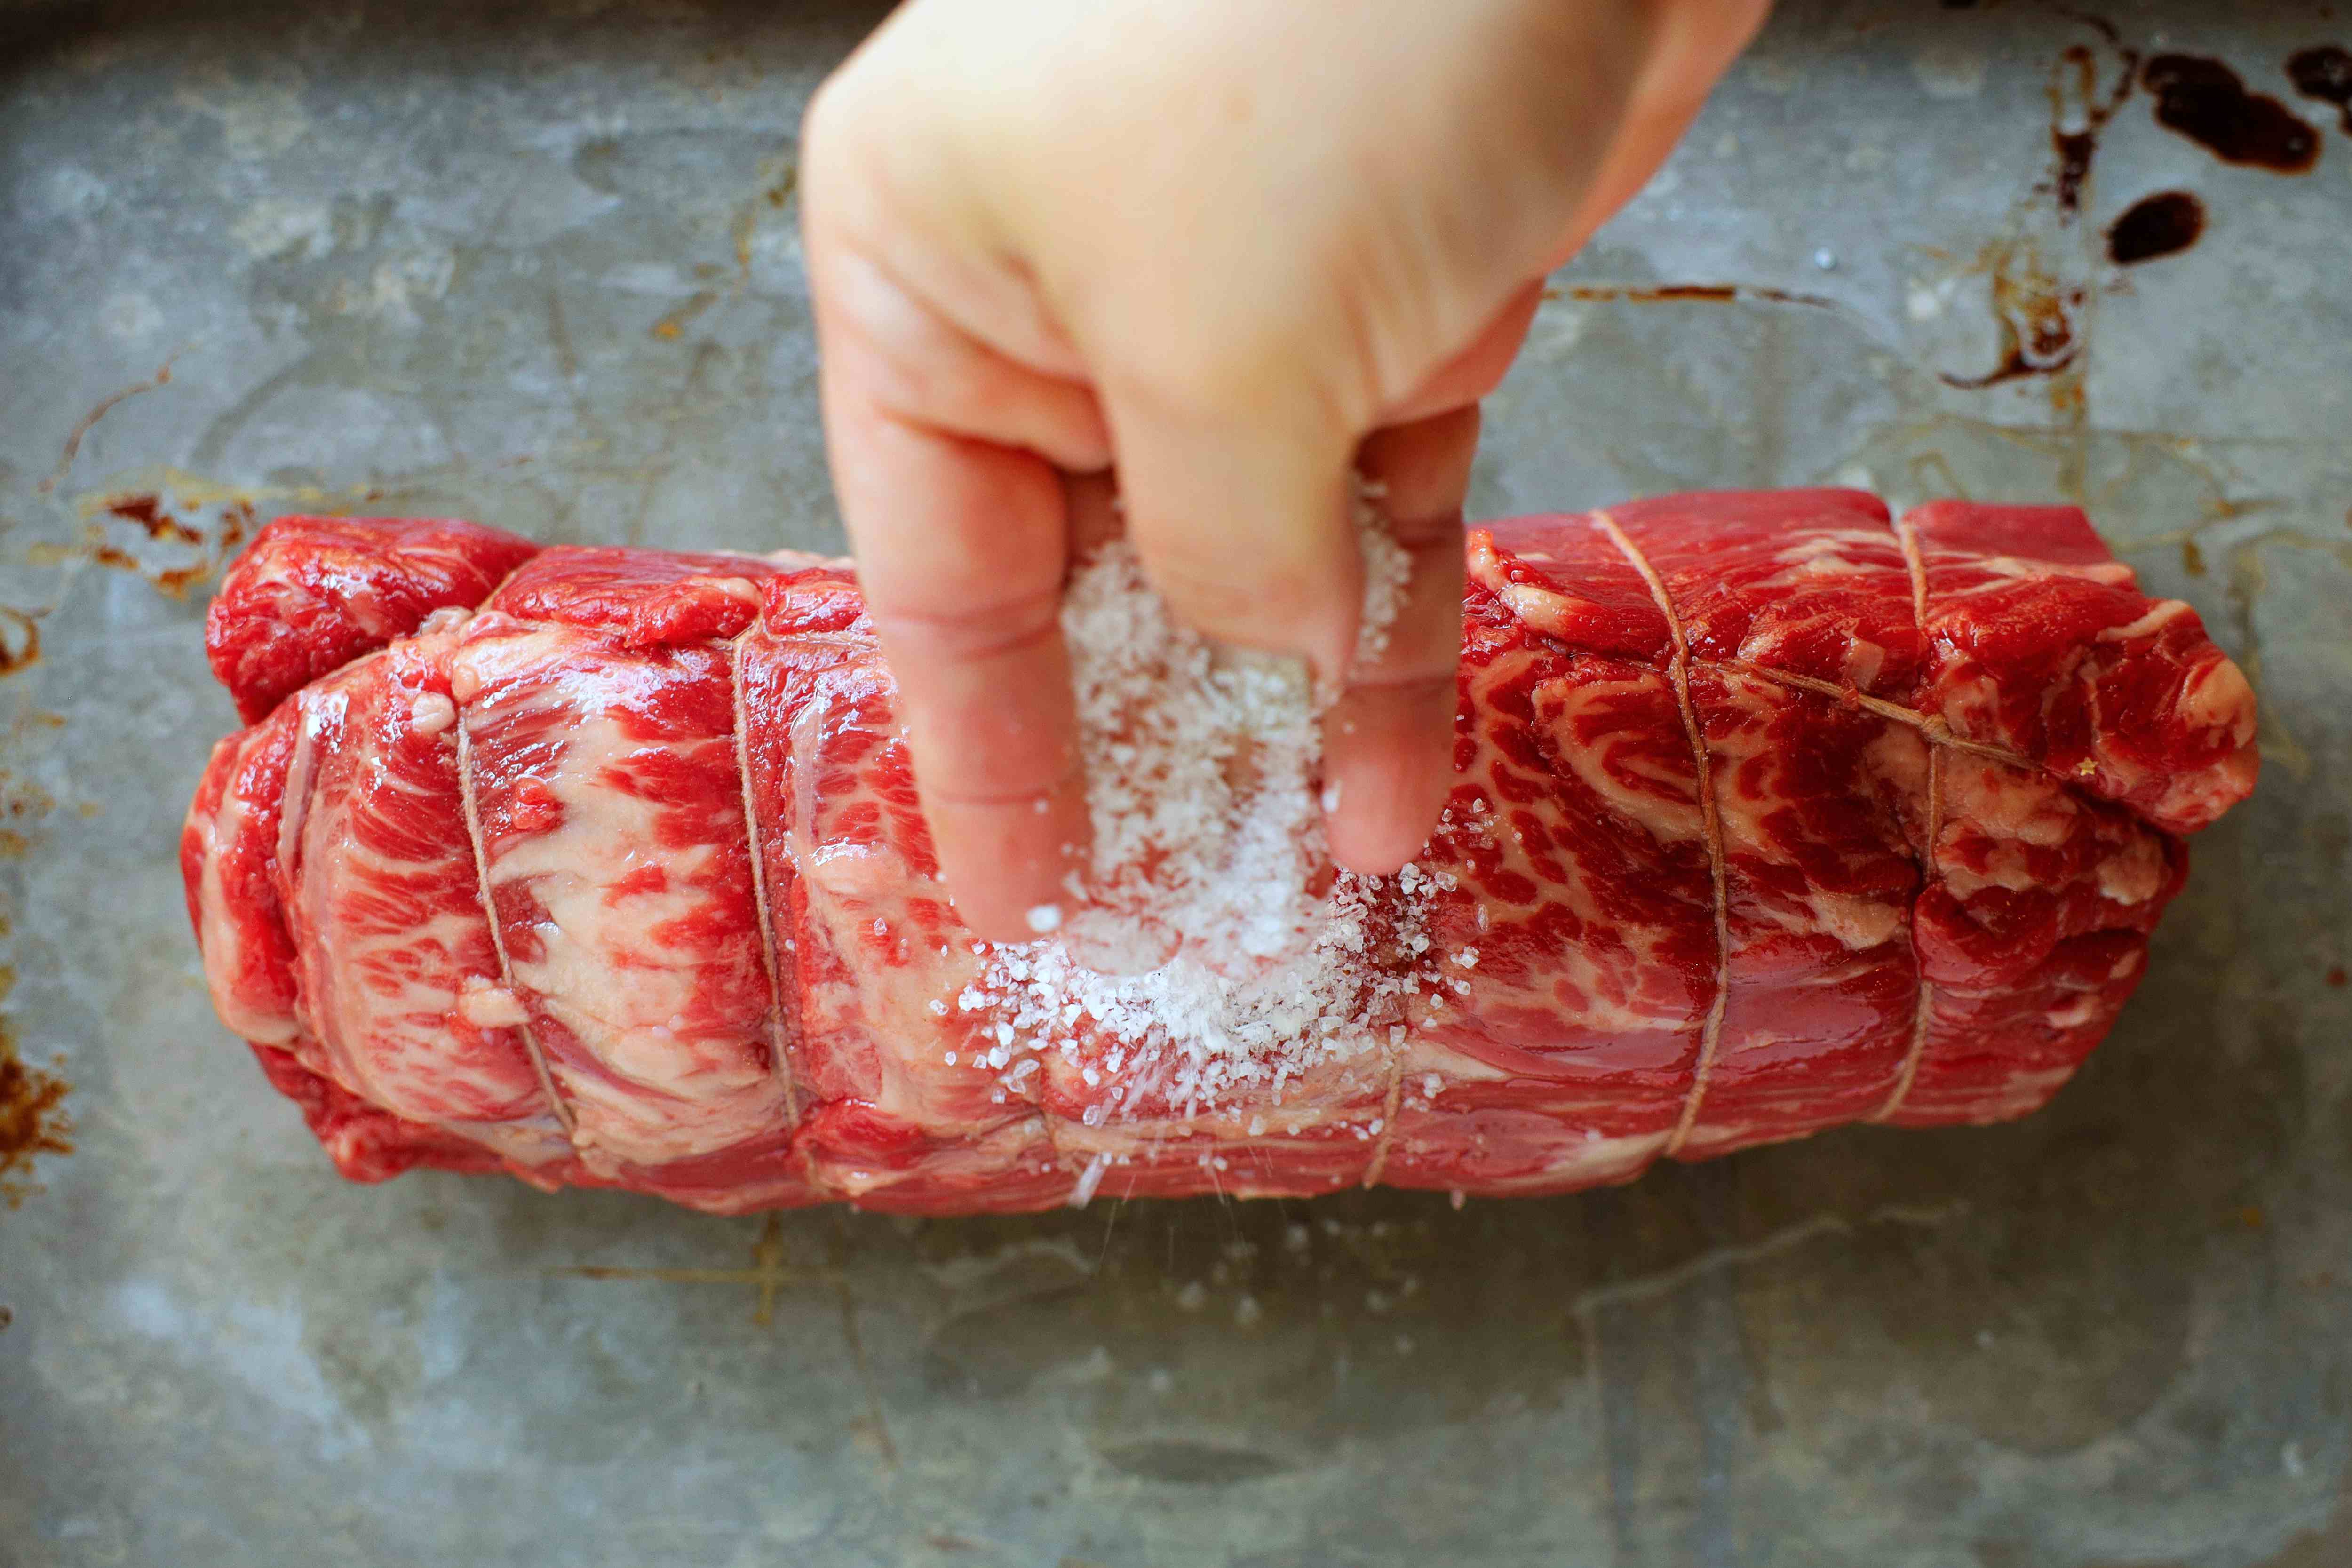 String-tied, marbled beef tenderloin being sprinkled with salt before going into the oven